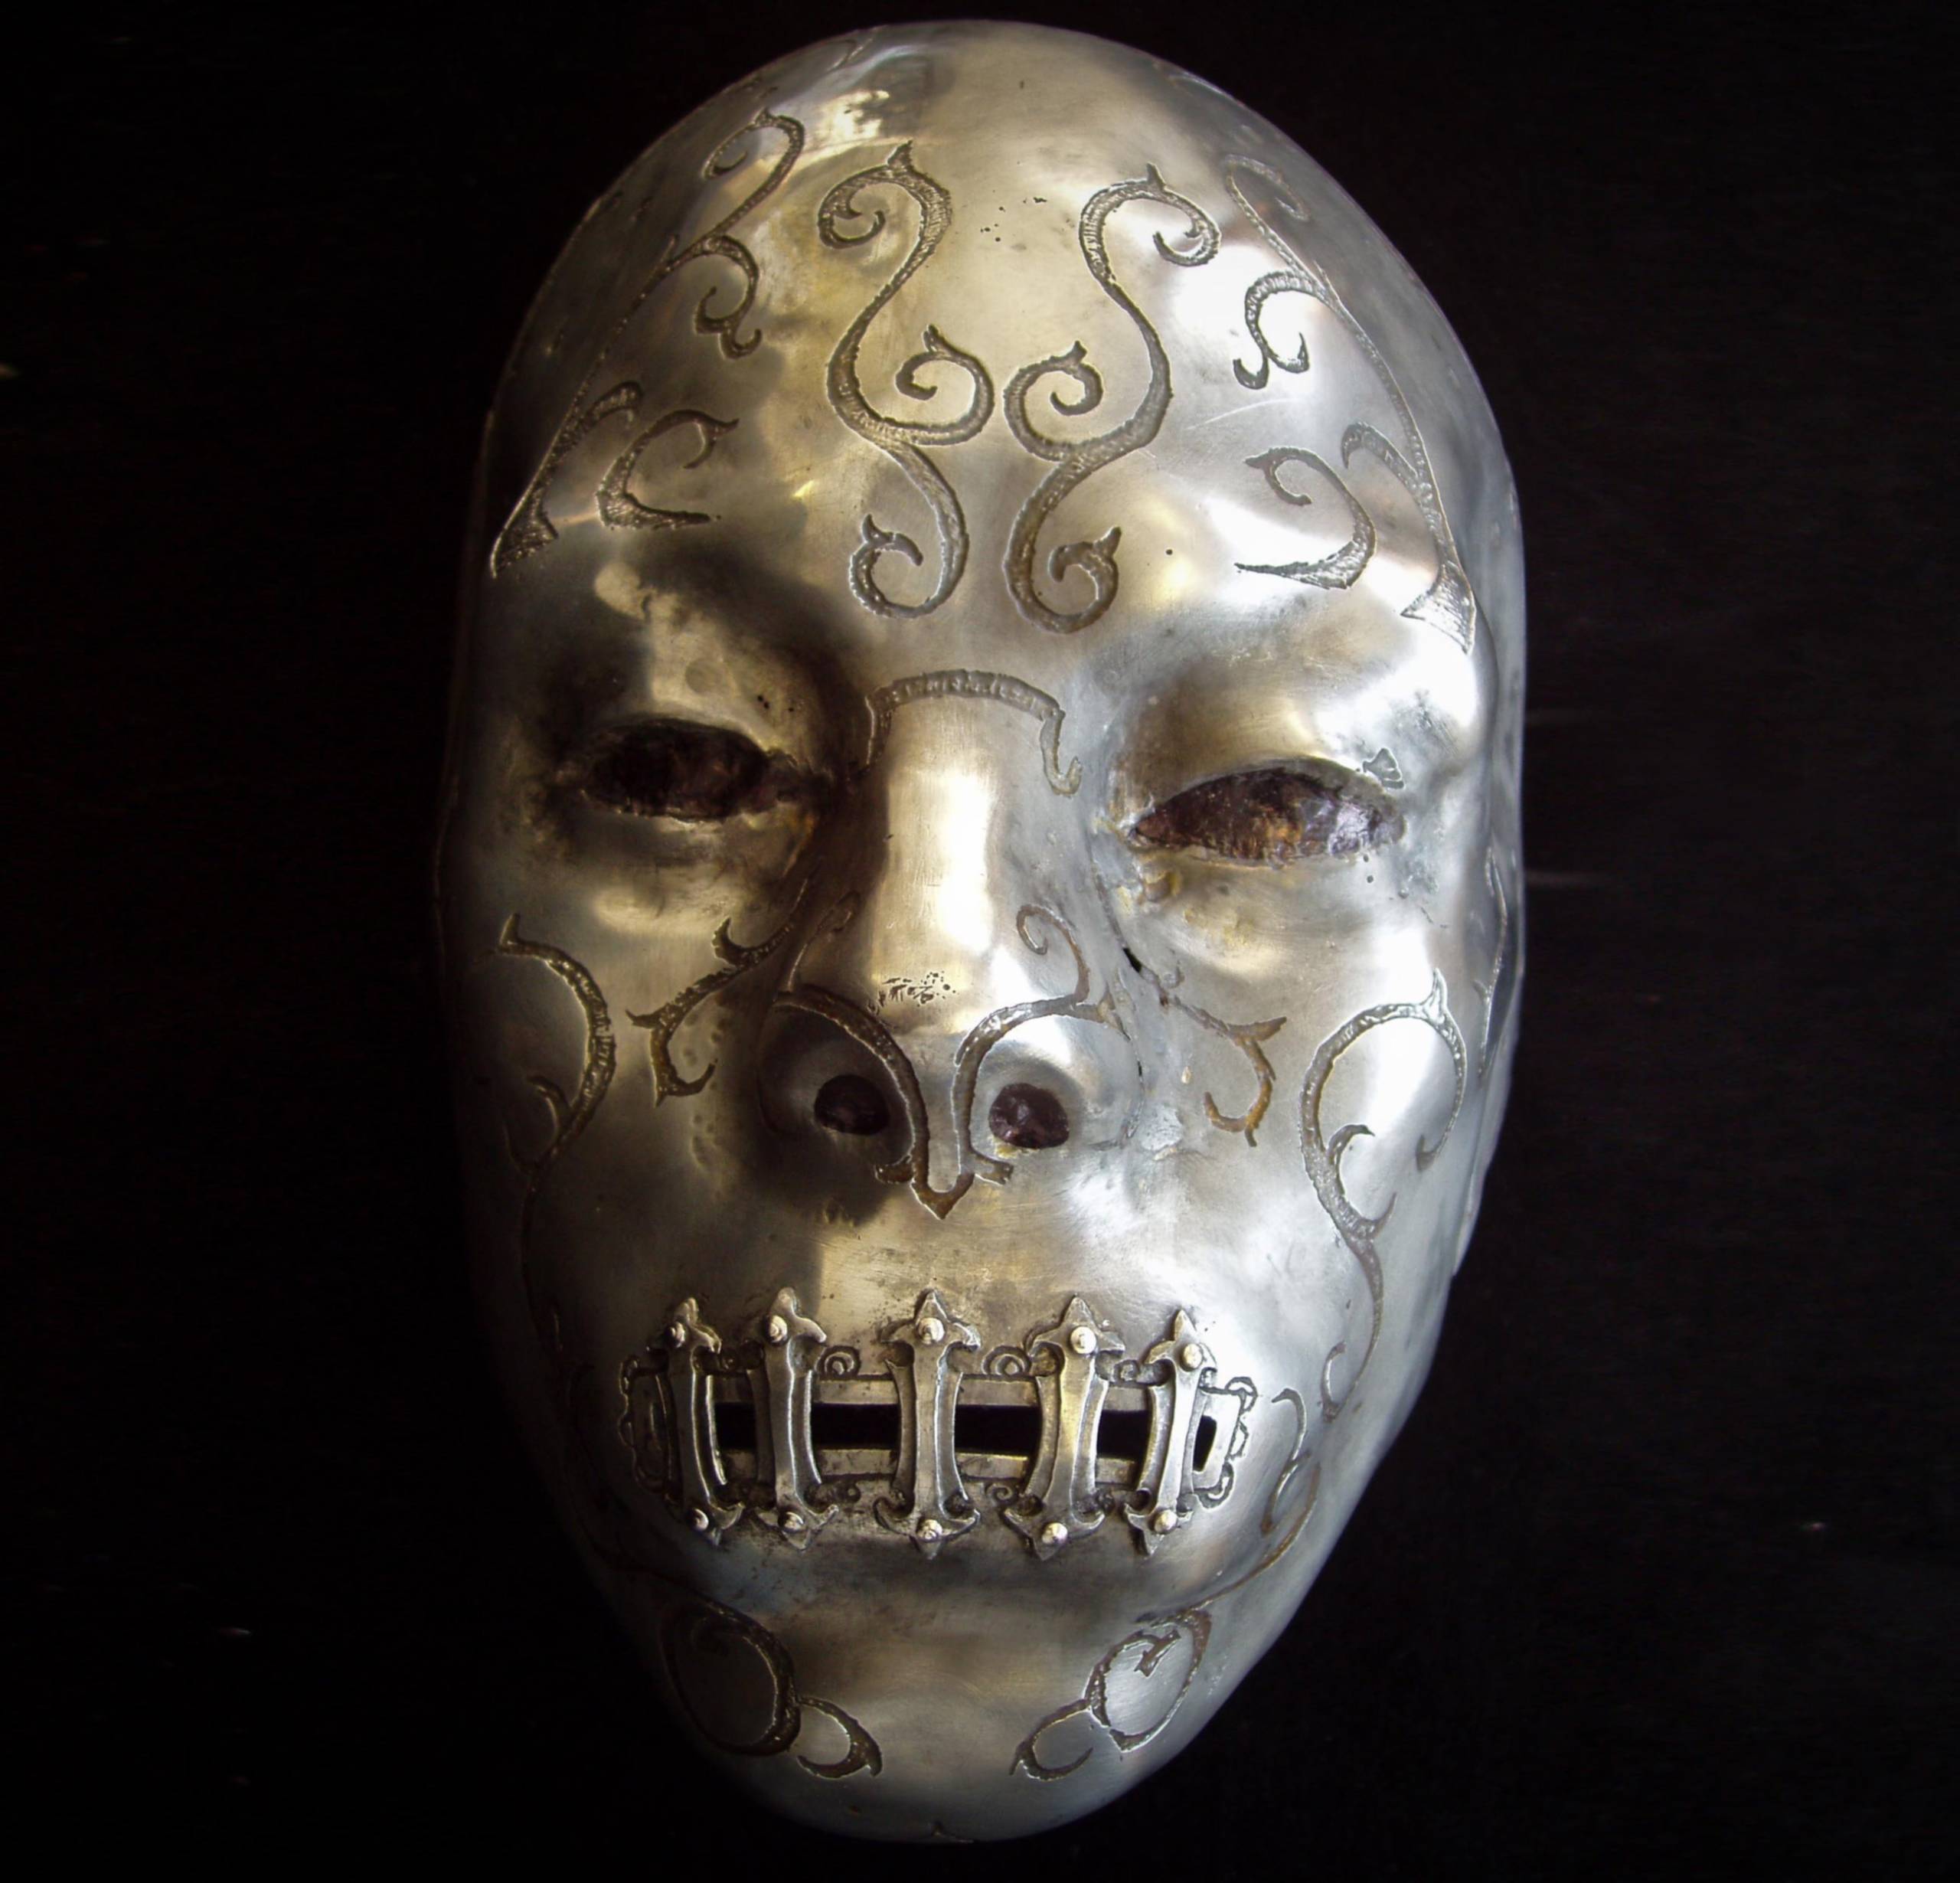 A Death Eater's mask